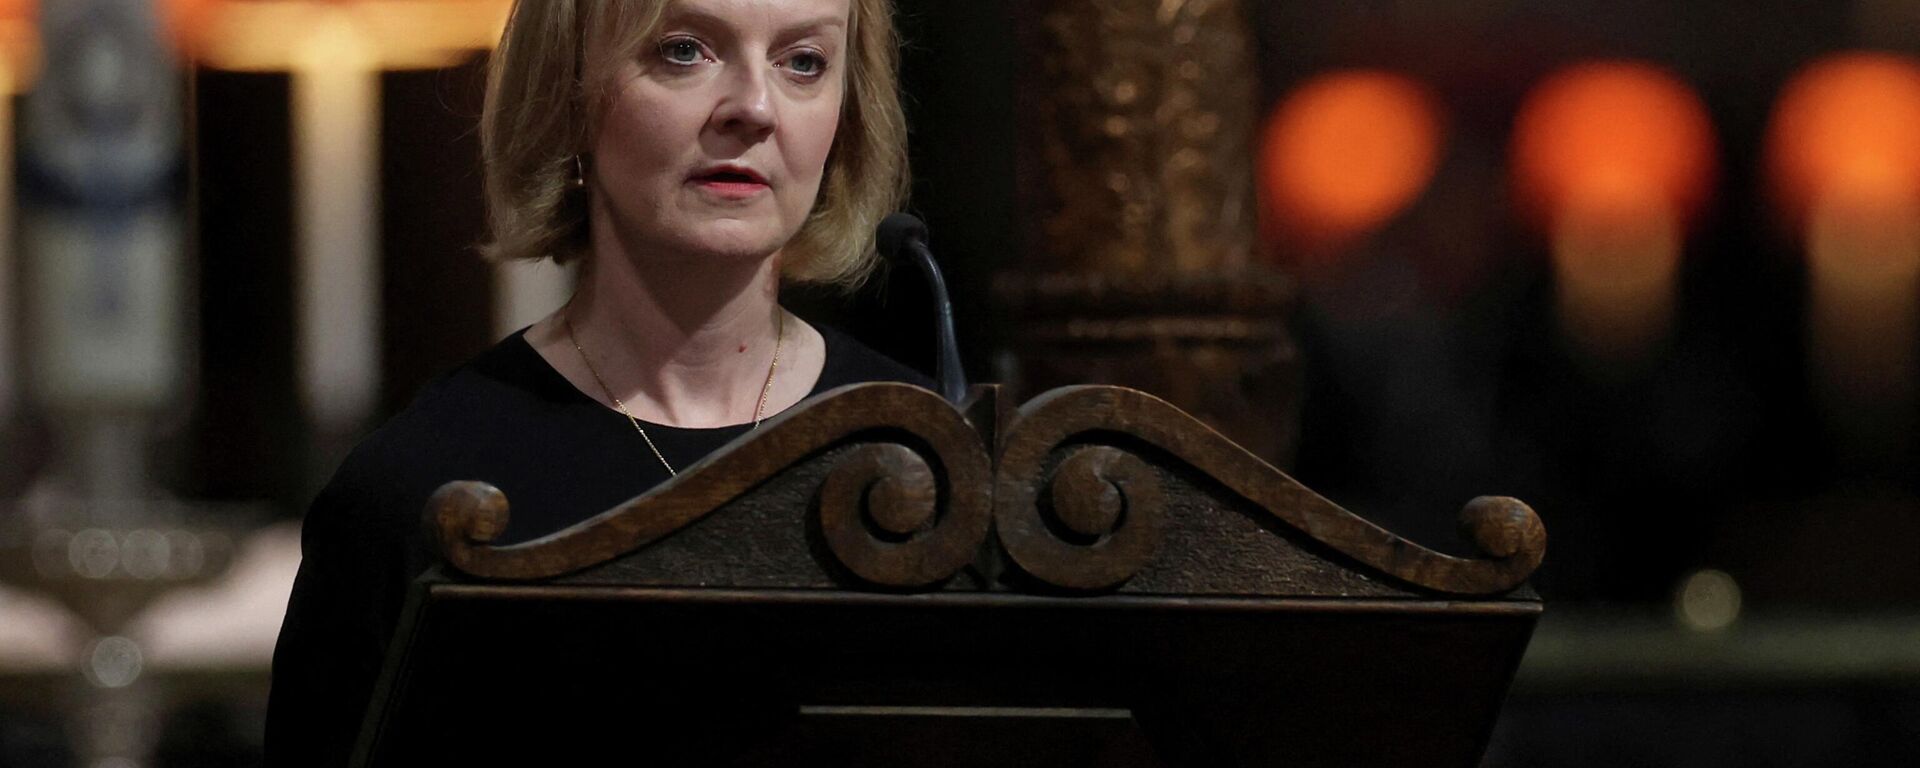 Britain's Prime Minister Liz Truss gives a reading during a Service of Prayer and Reflection for Britain's Queen Elizabeth II at St Paul's Cathedral in London on September 9, 2022 - Sputnik International, 1920, 13.09.2022